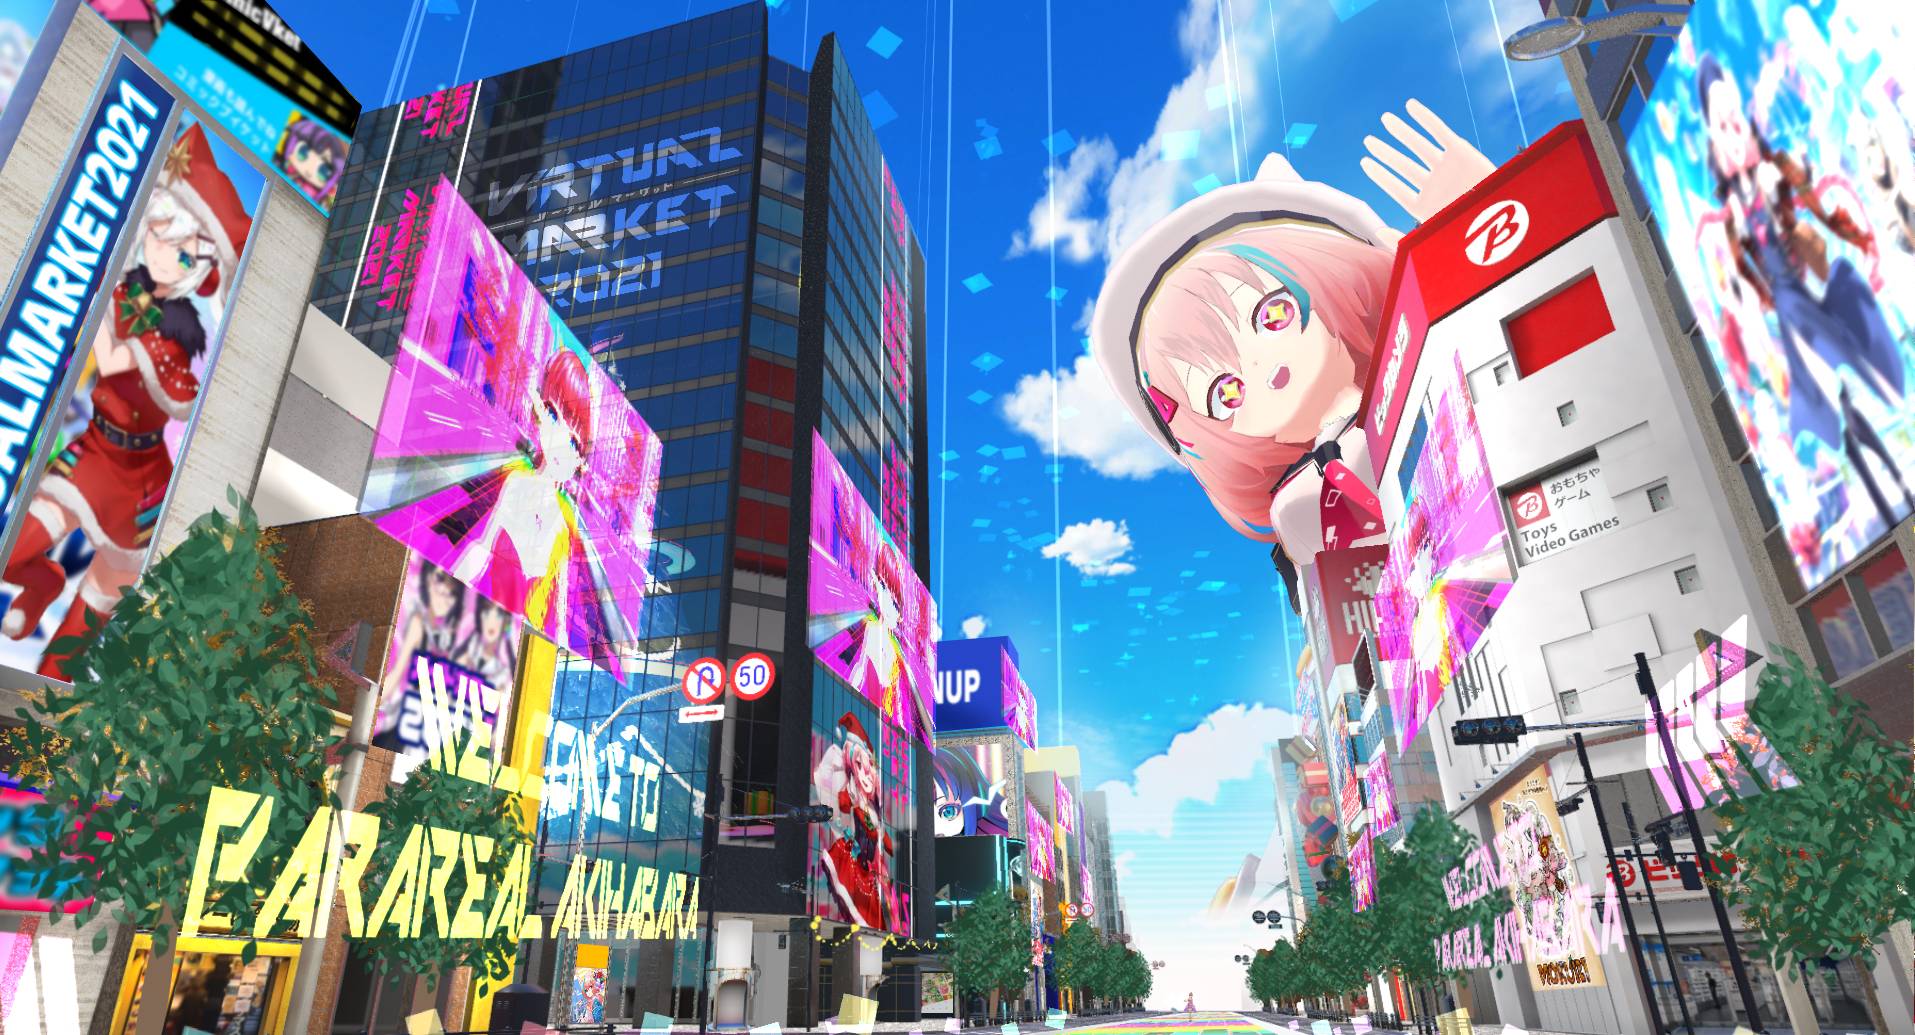 Hikky, a Tokyo-based provider of virtual reality and augmented reality services, is known for its Virtual Market, a massive online event featuring a dizzying array of virtual spaces — some resembling real places, some that are pure fantasy — including this one based on Tokyo's Akihabara neighborhood. | HIKKY